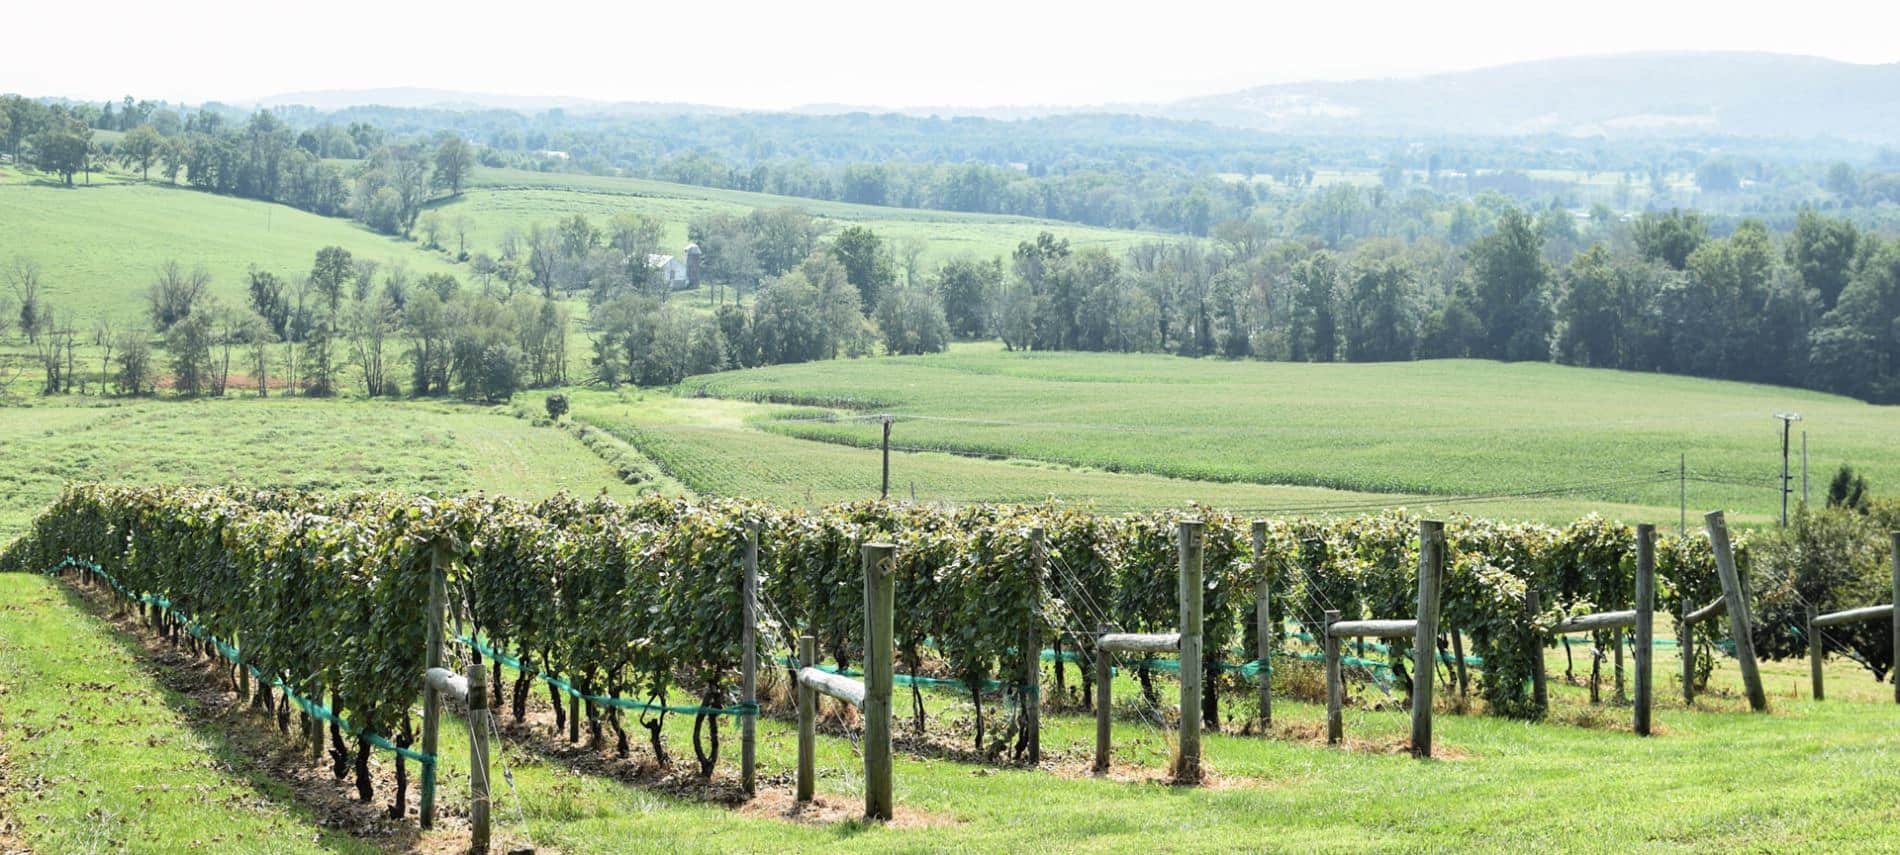 Small vineyard next to rolling hills covered with green grasses and trees